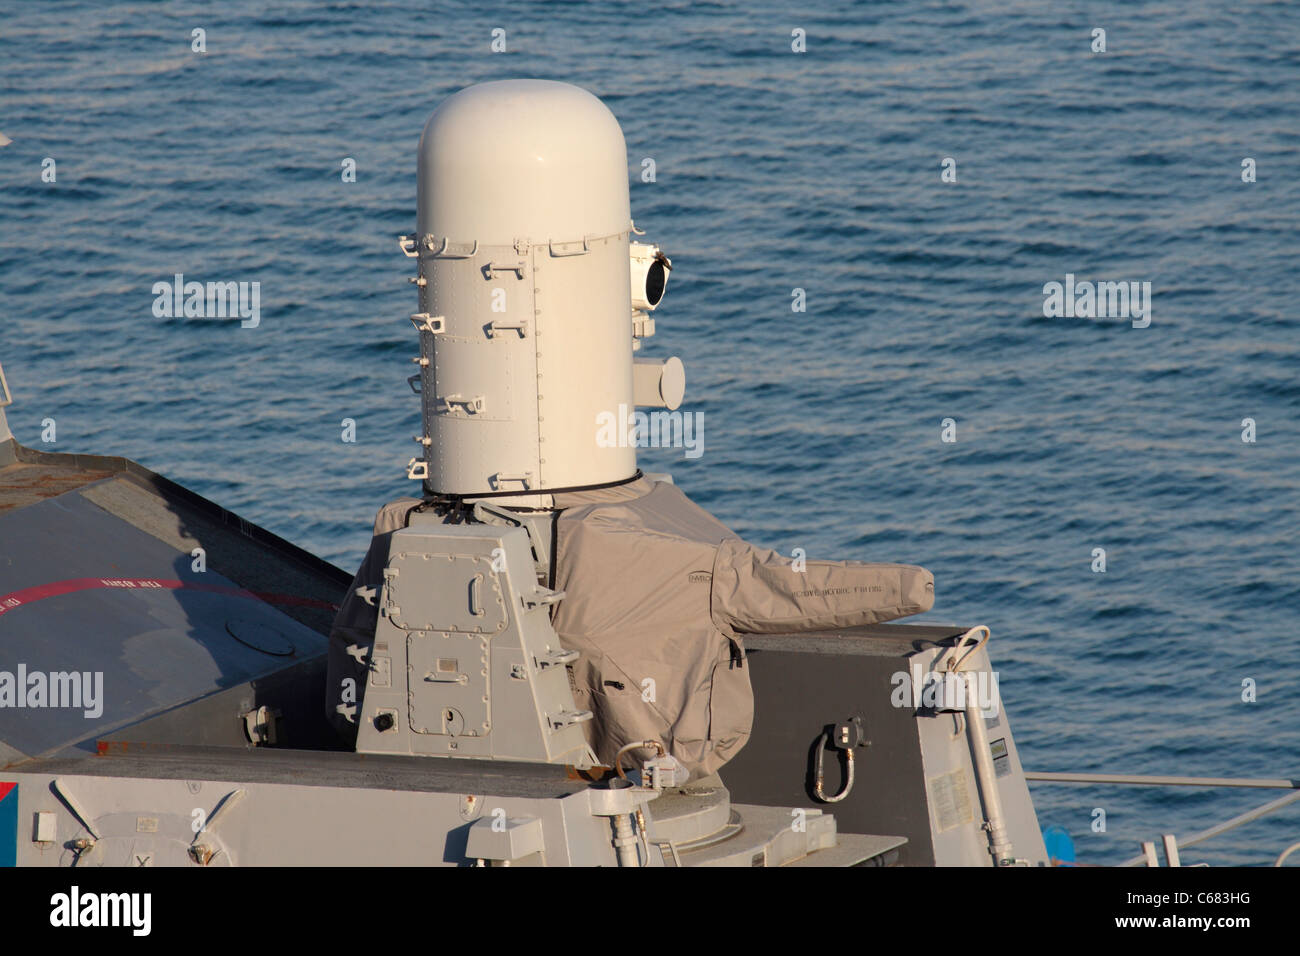 The Phalanx close-in weapon system (CIWS) as mounted on board the destroyer USS Carney for defence against anti-ship missiles Stock Photo